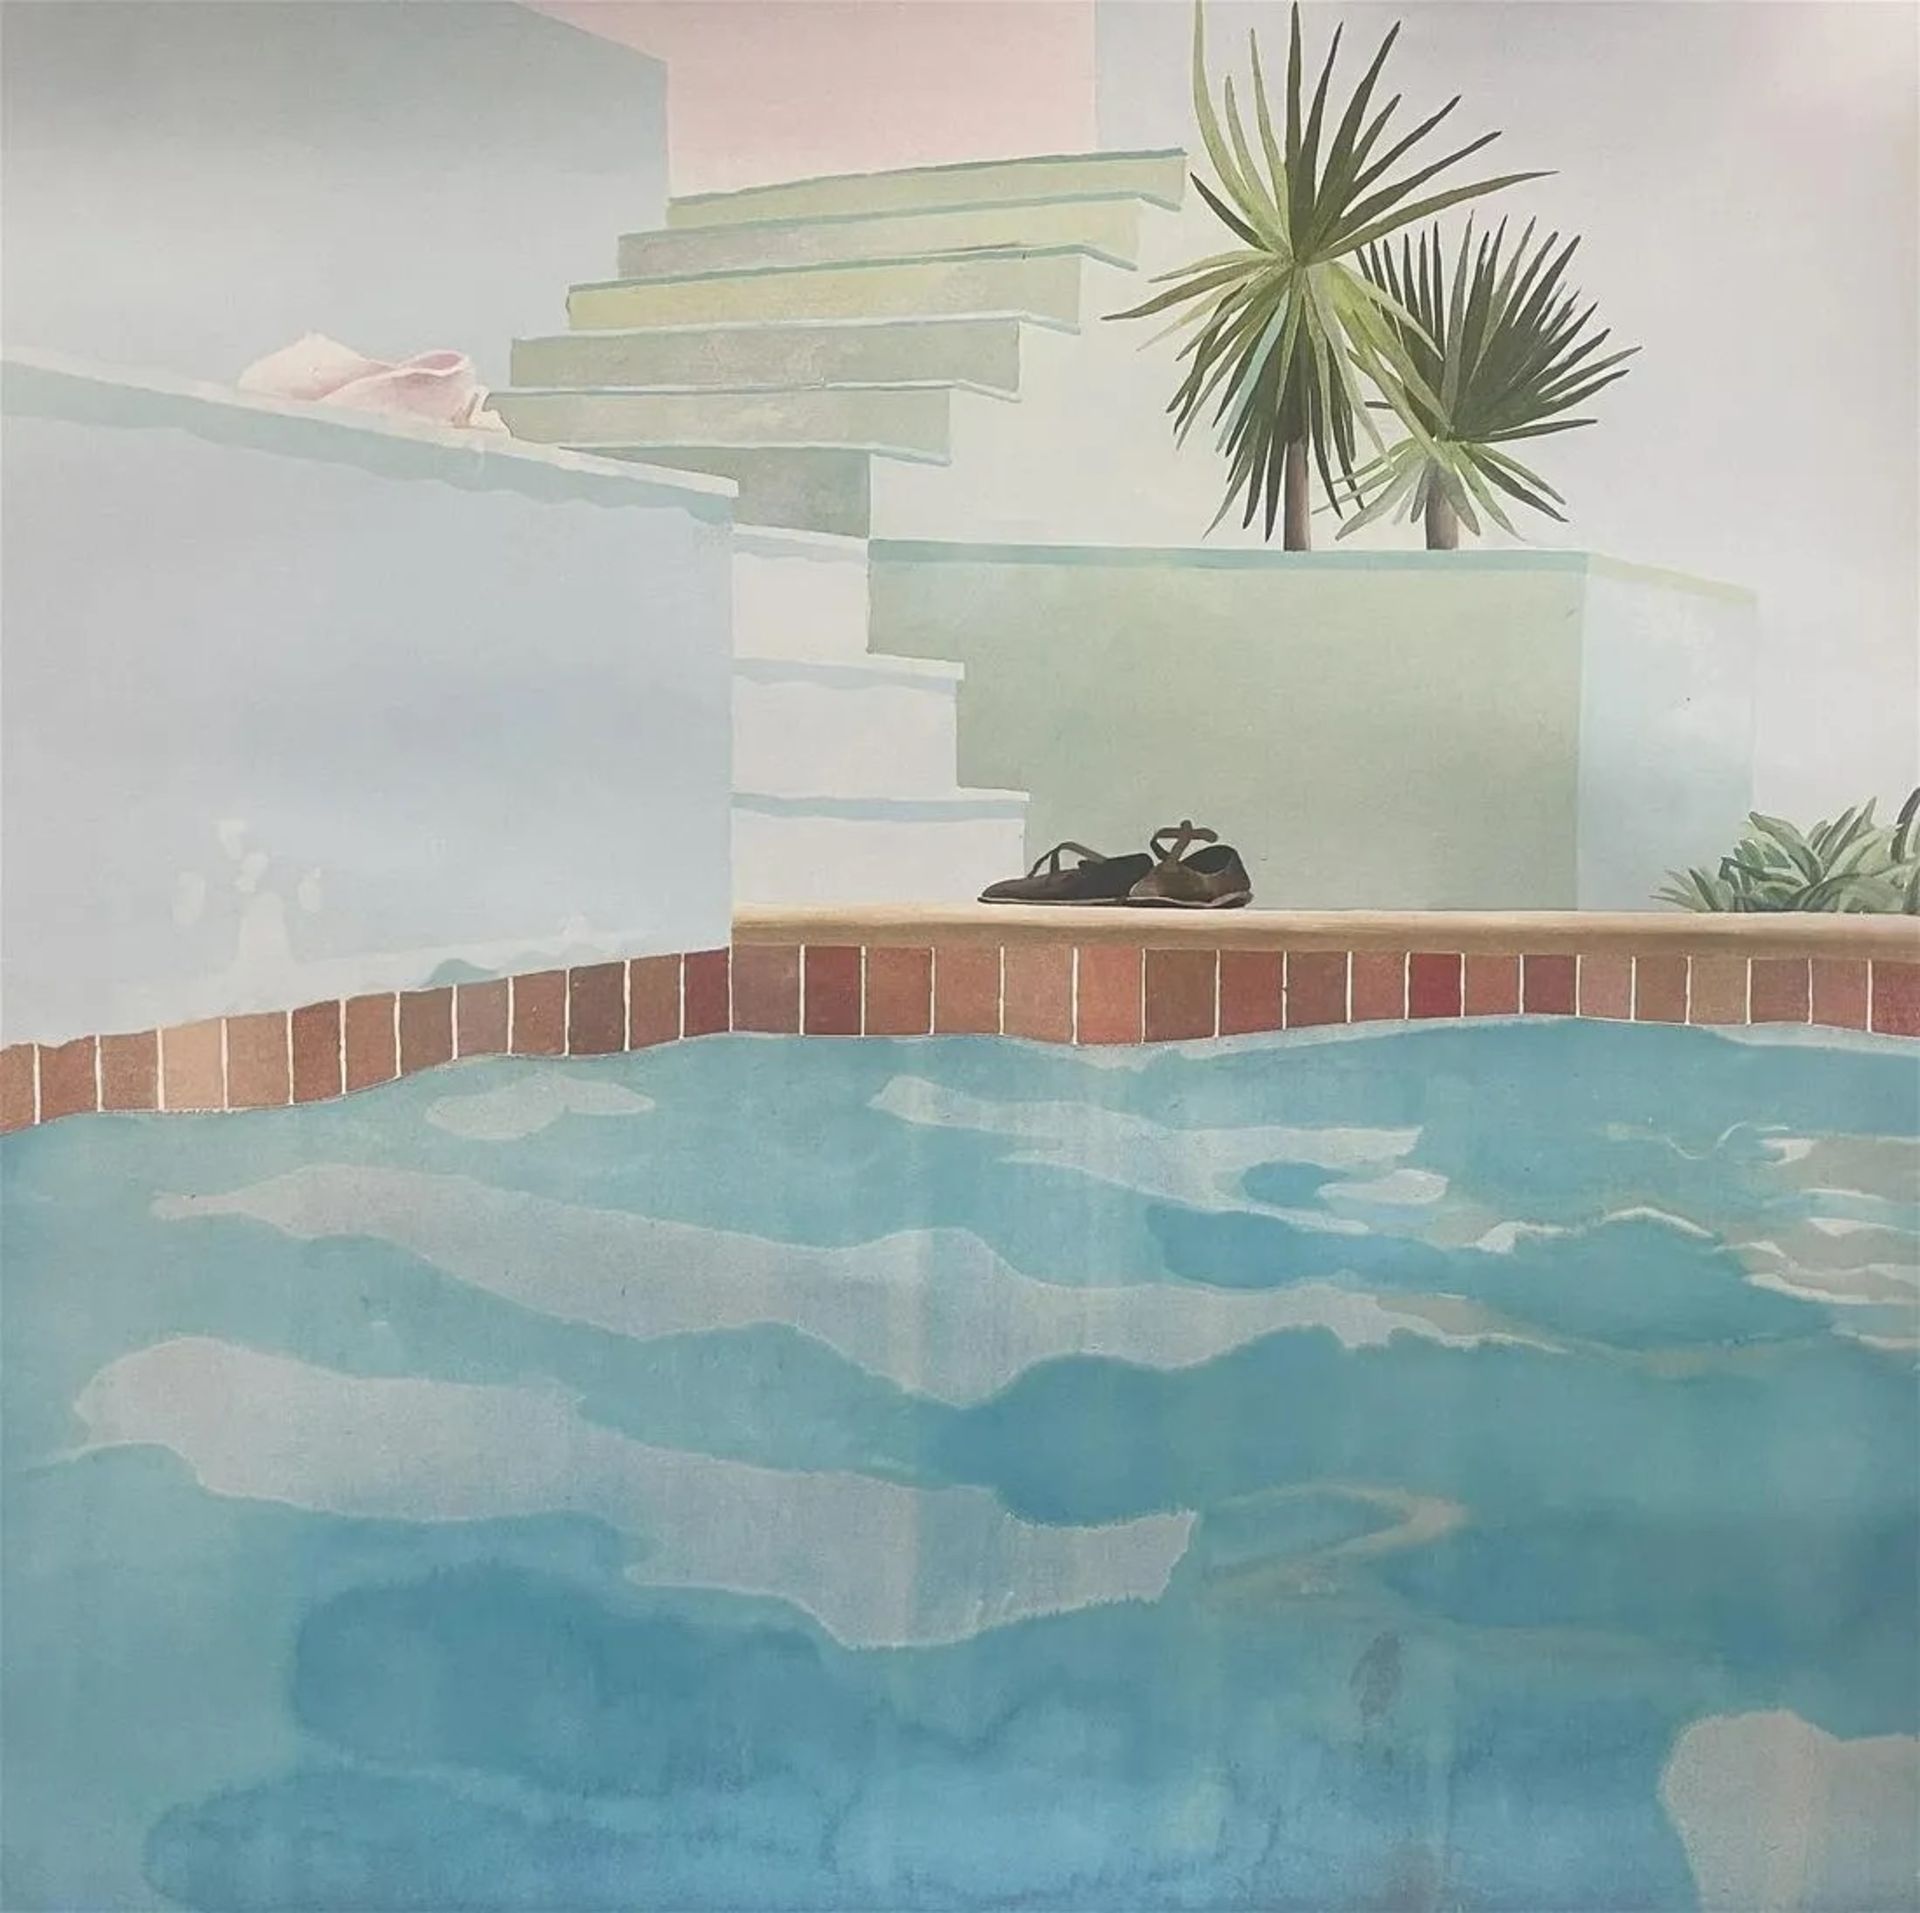 David Hockney "Pool and Steps, 1971" Offset Lithograph